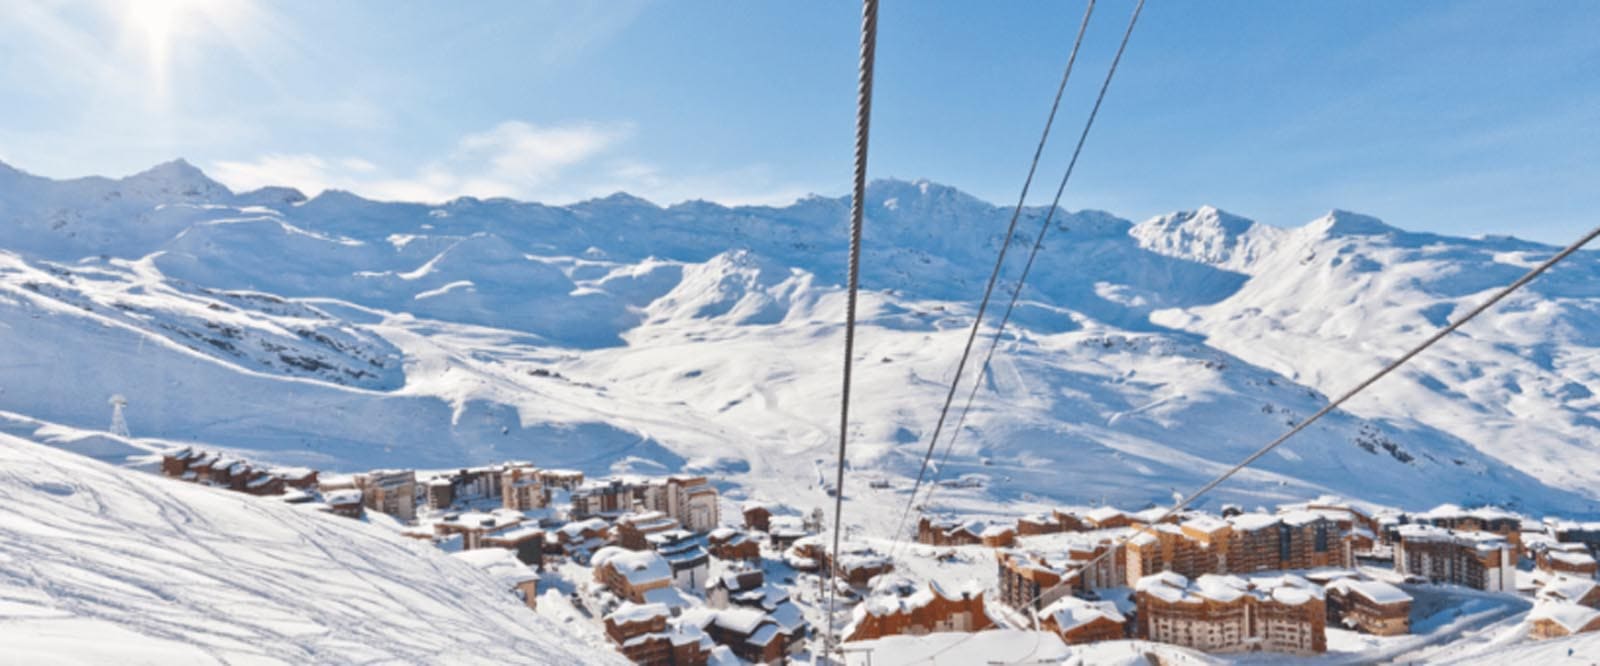 A view over the French ski resort of Val Thorens